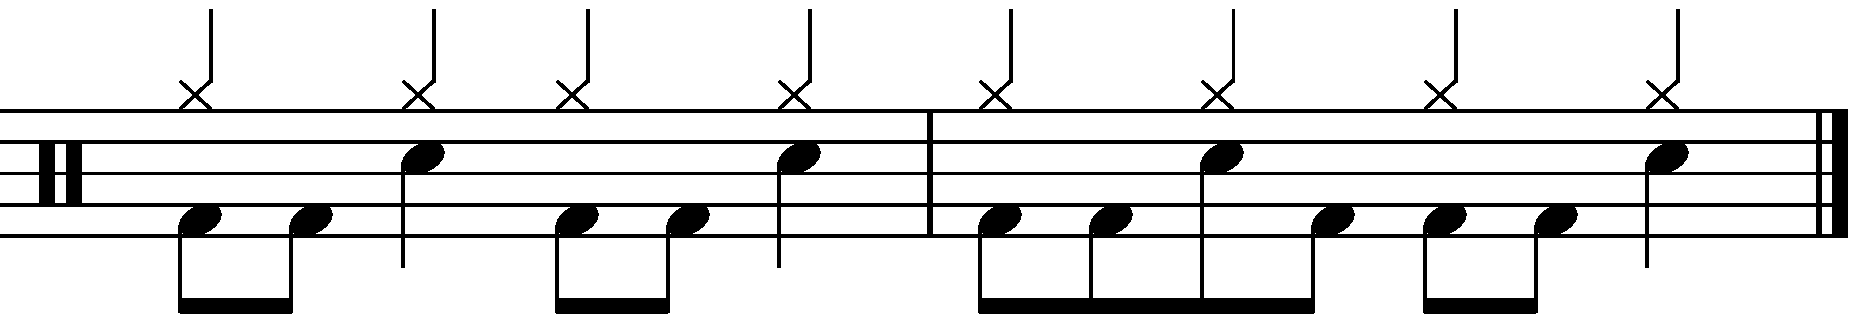 2 Bar Grooves - Example 1e